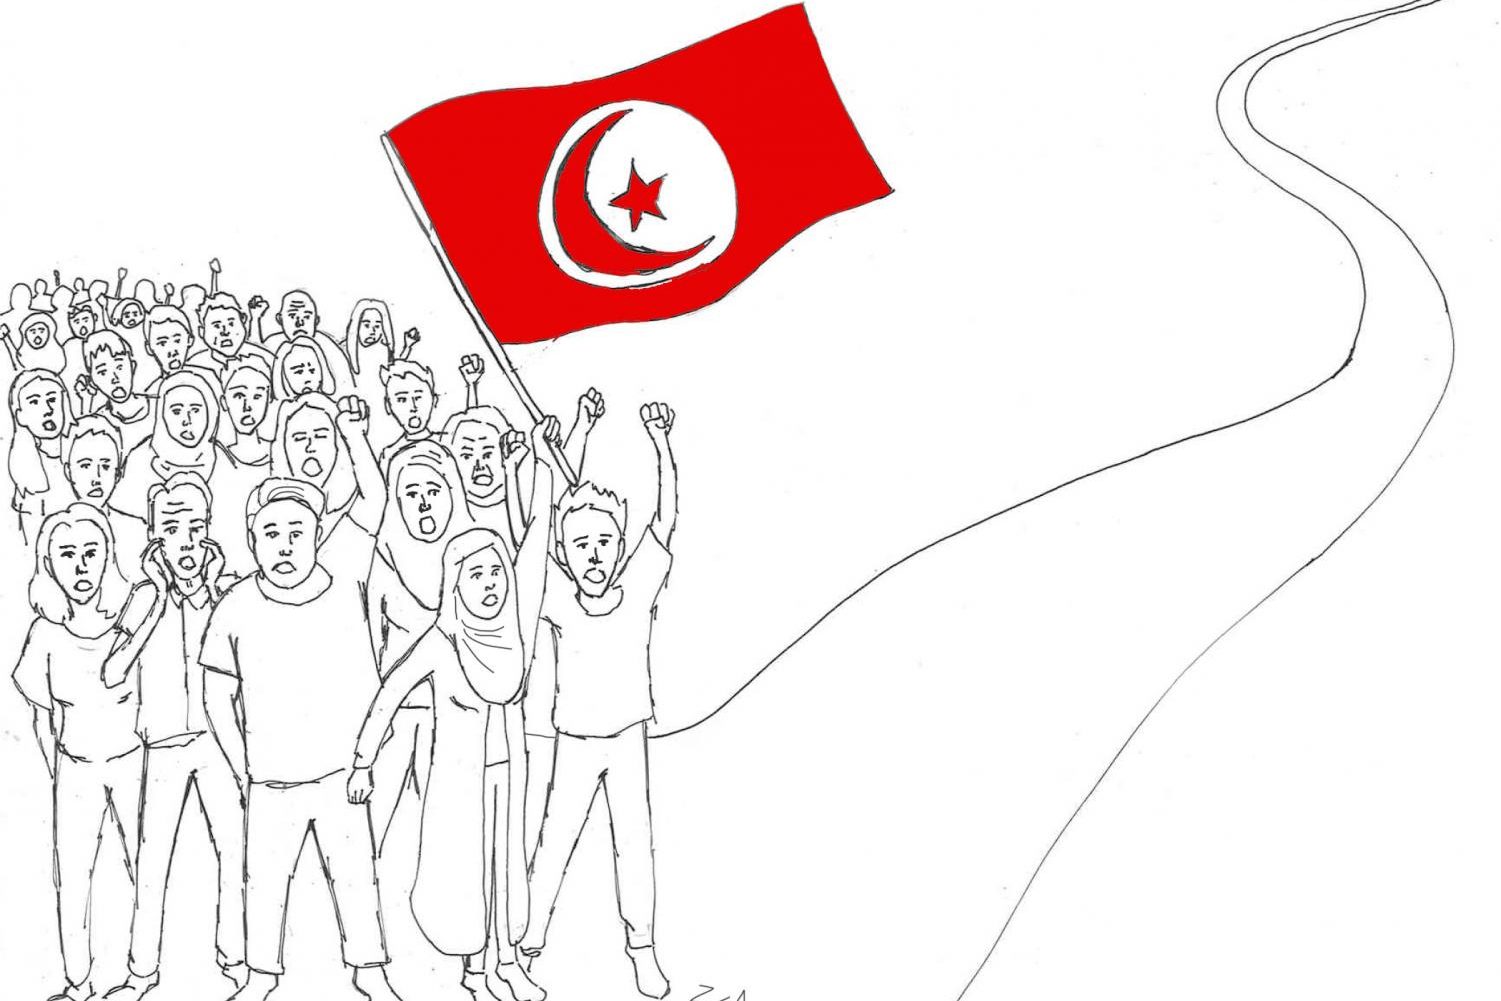 Nine years on from the Arab Spring, its initiator, Tunisia, is the only country that has emerged as democratic. The countrys path to democracy has been flawed, yet remains a strong example for nations in the region. 